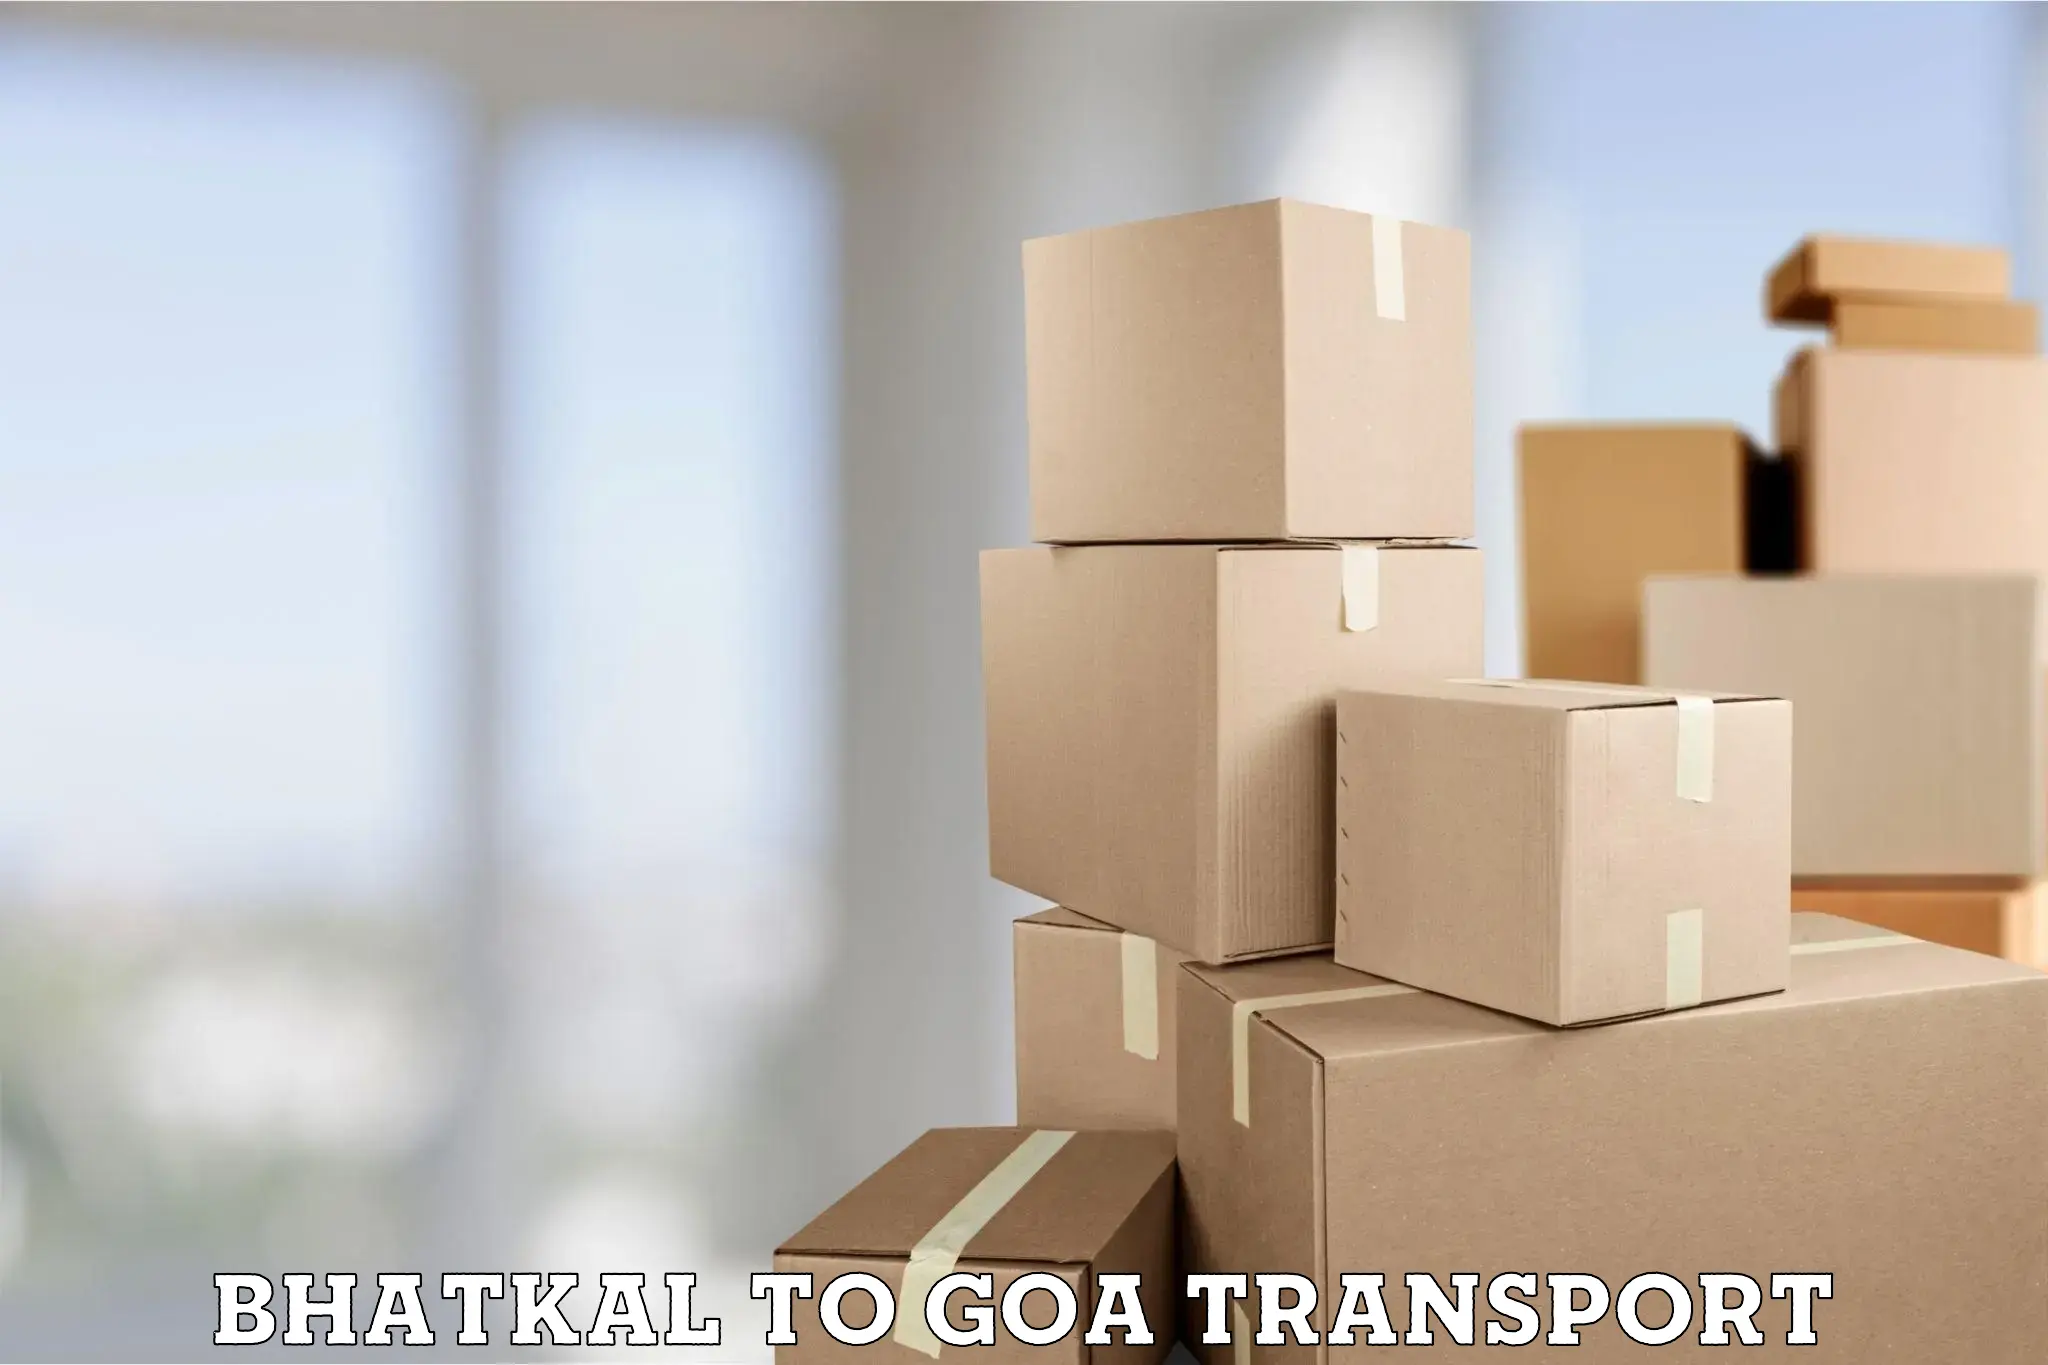 Transport bike from one state to another Bhatkal to IIT Goa